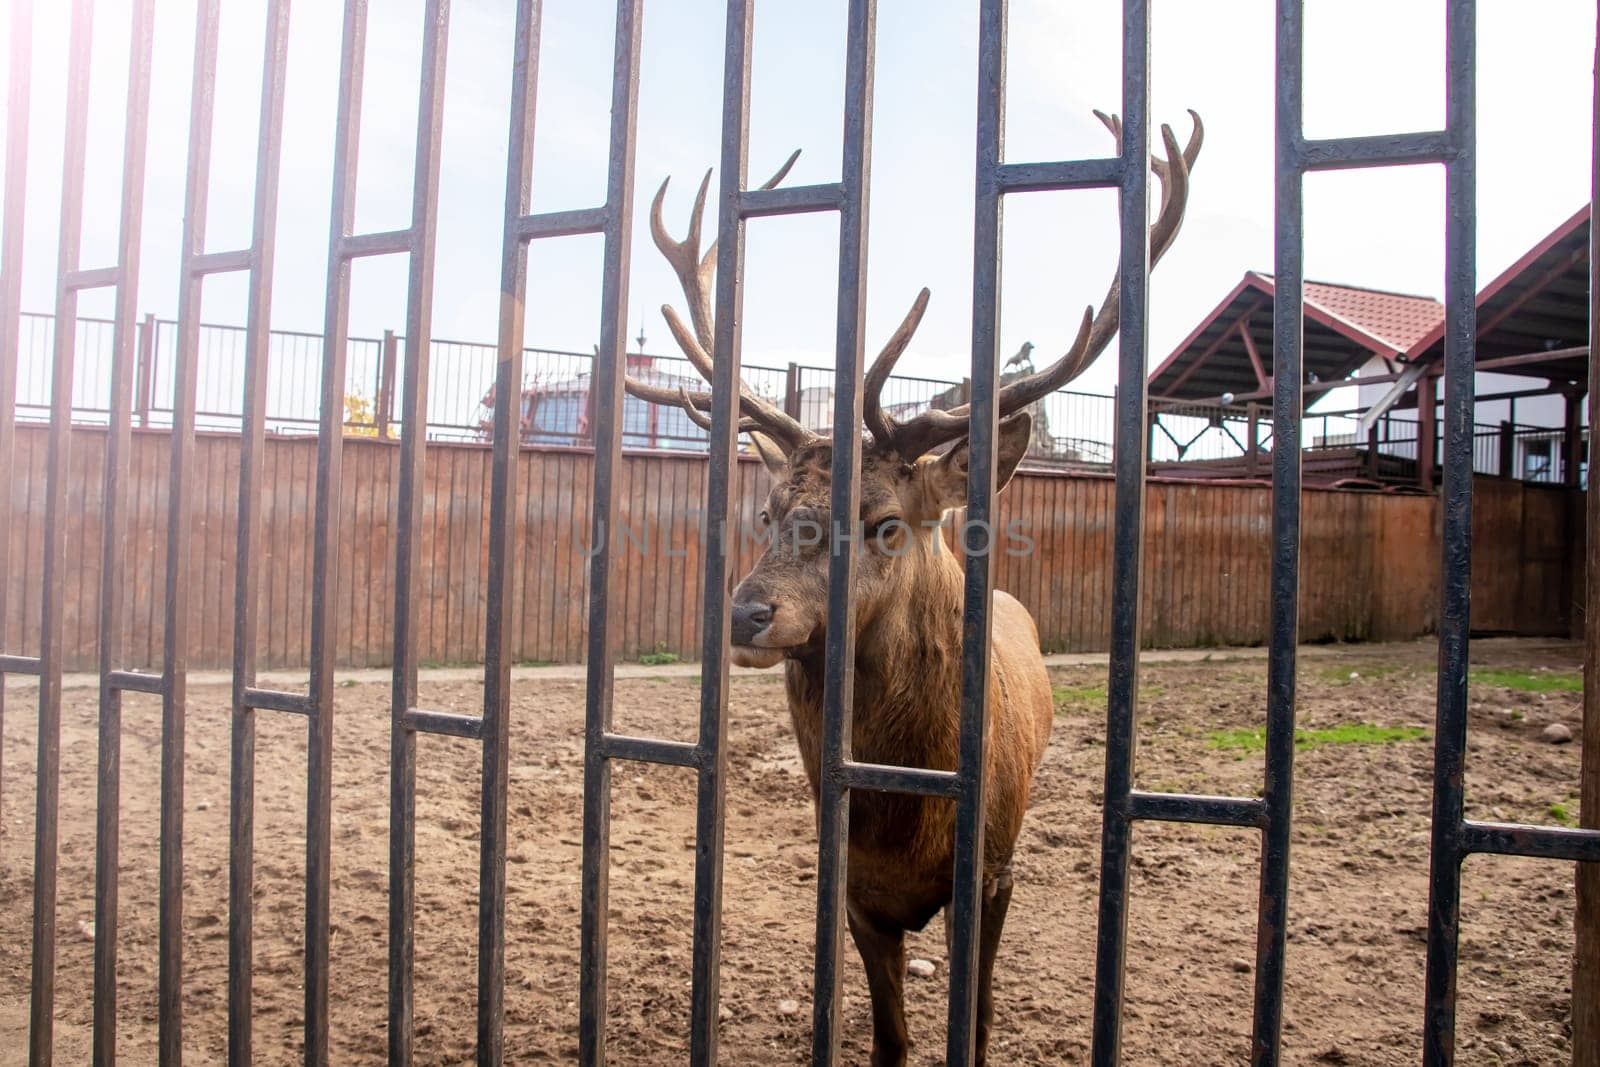 A deer behind the bars of an aviary close up